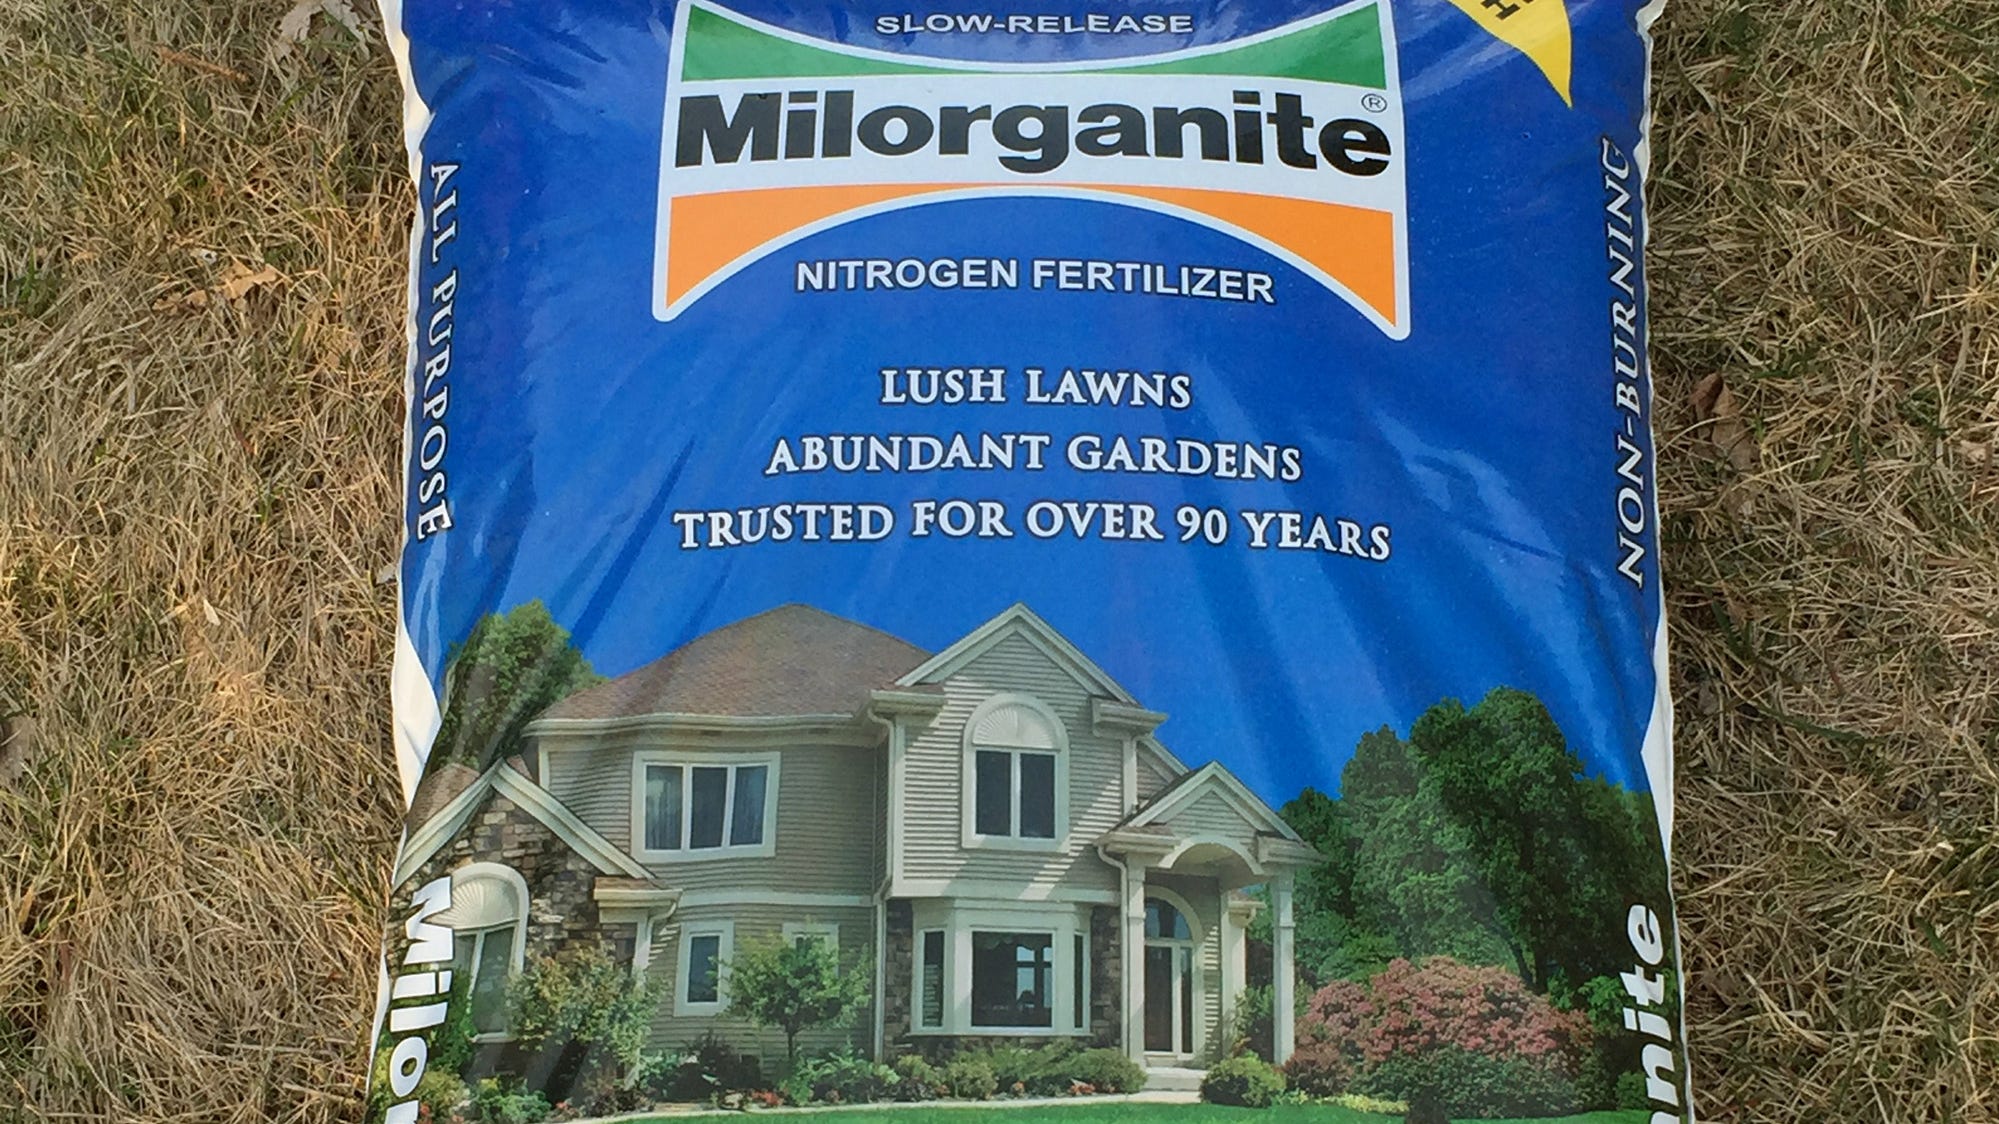 Milorganite fertilizer on your lawn may contain 'forever chemicals'